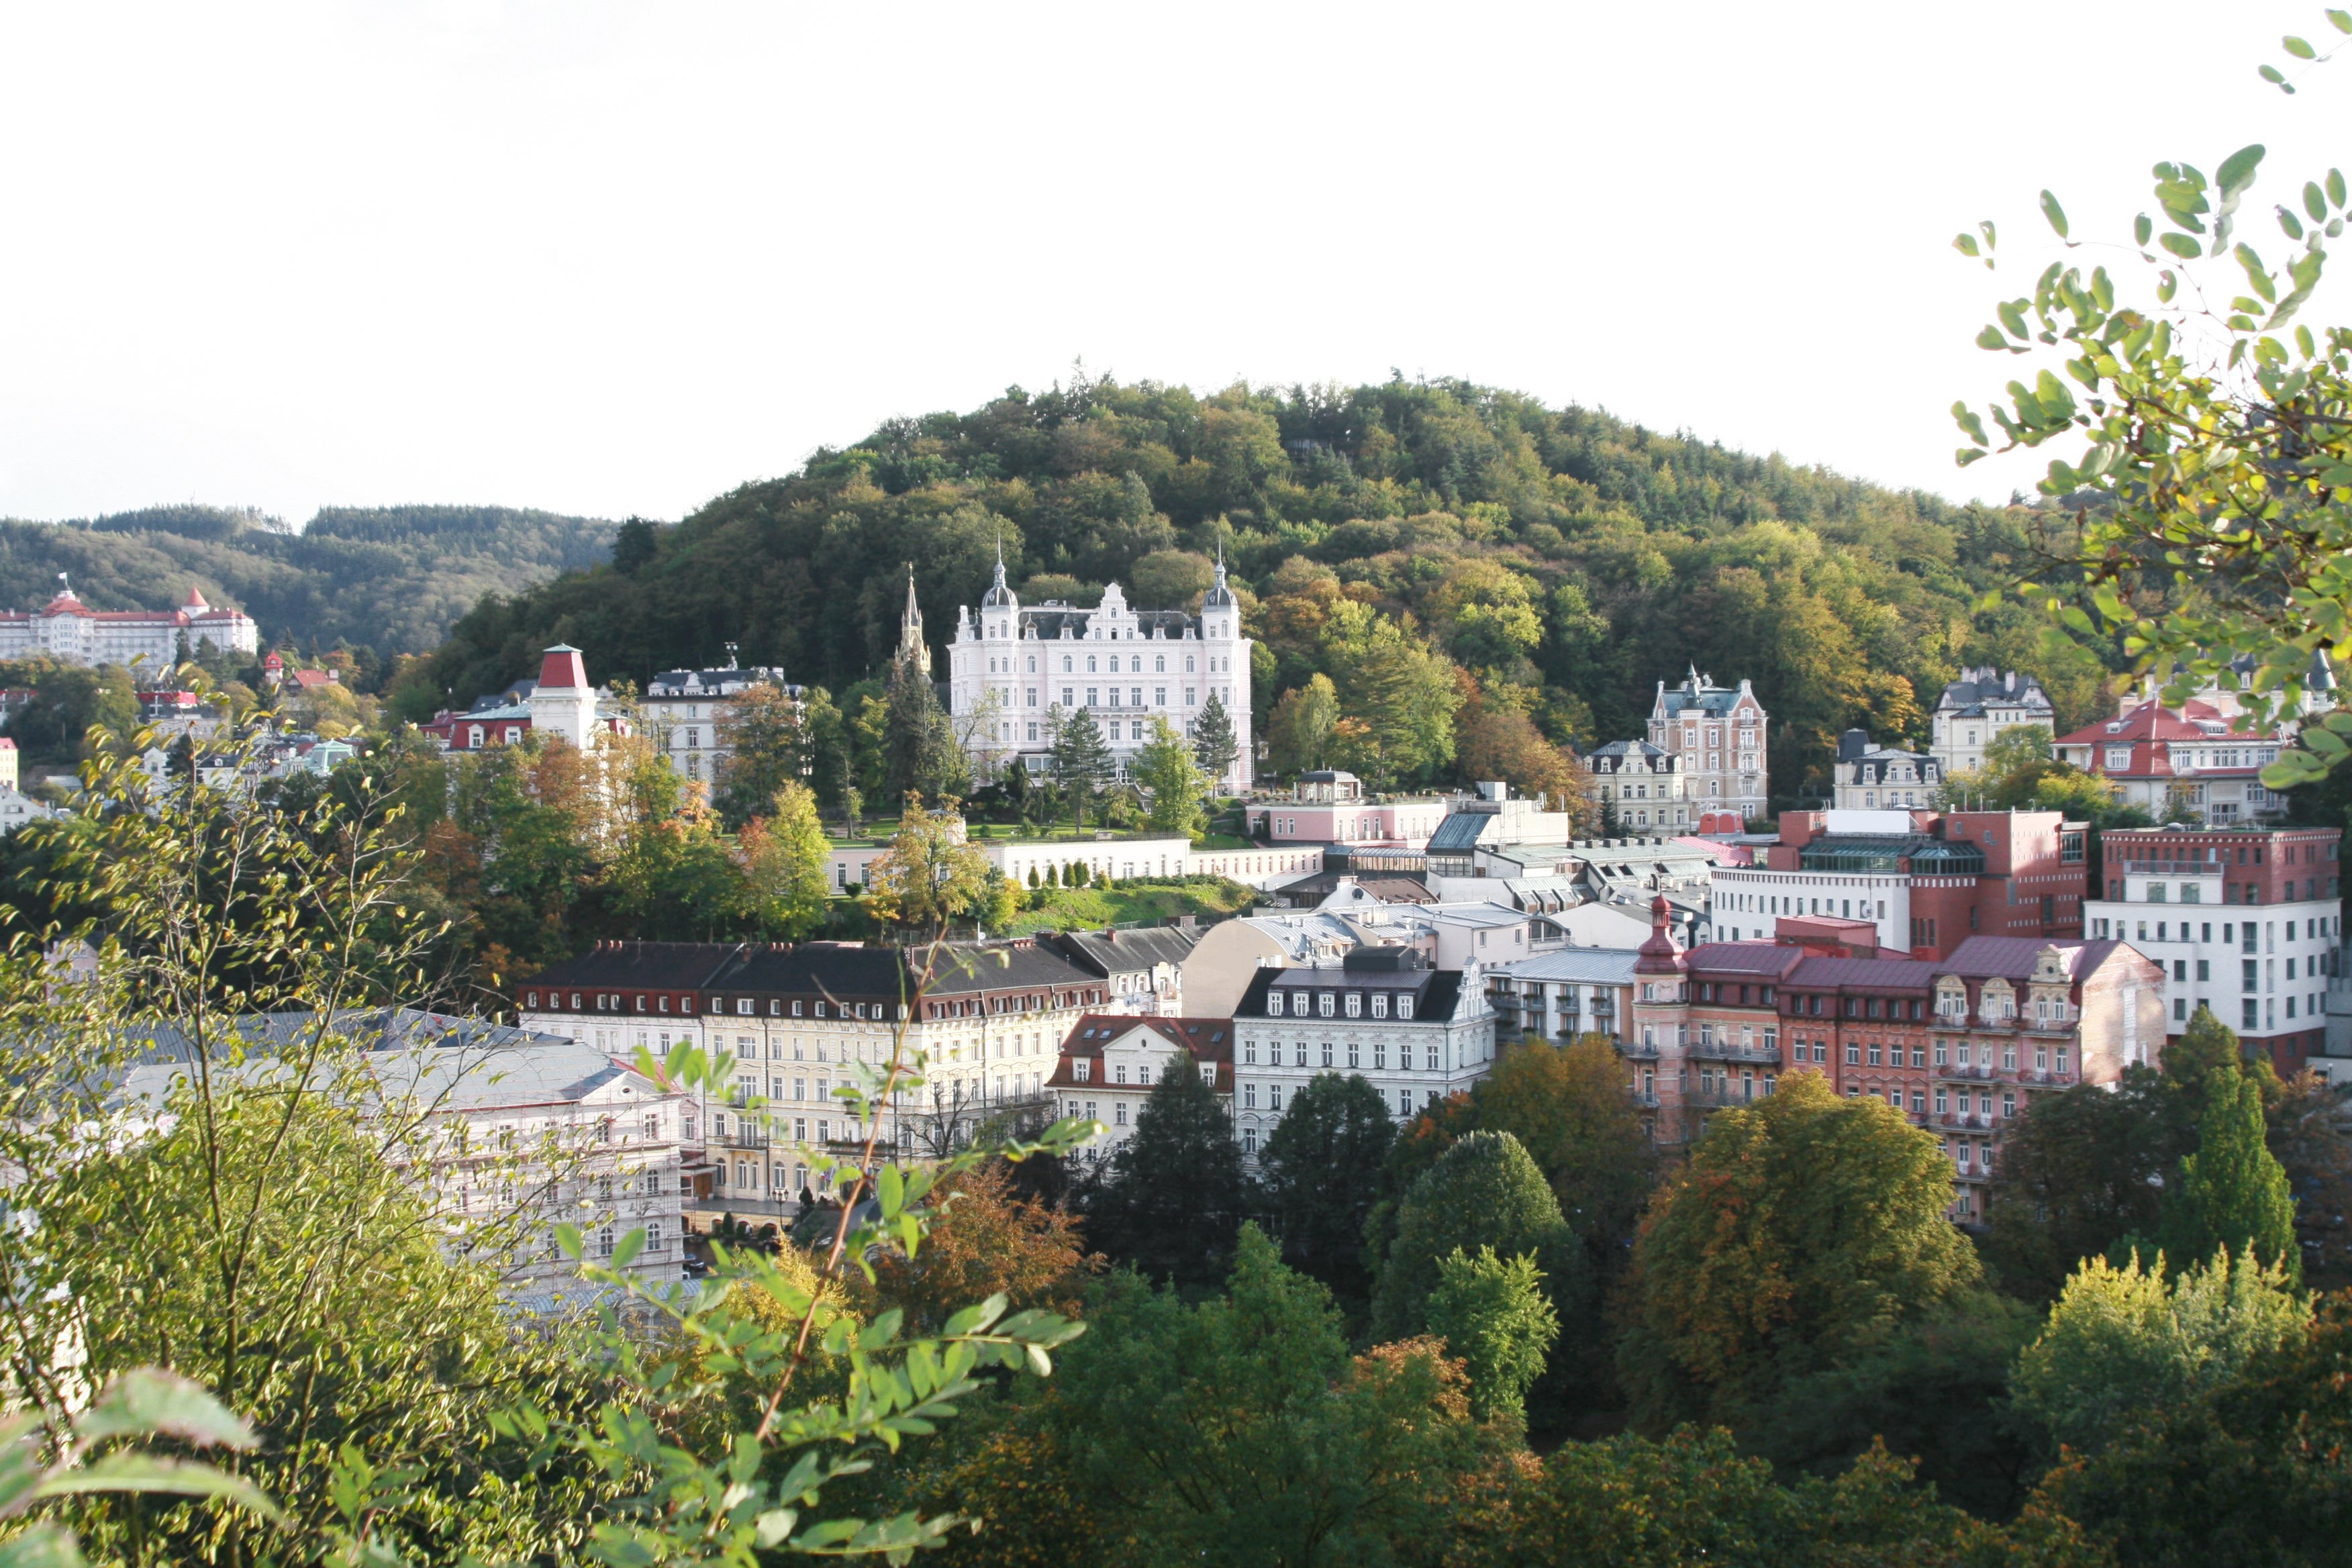 A view of Karlovy Vary, thermal town in Czech Republic.